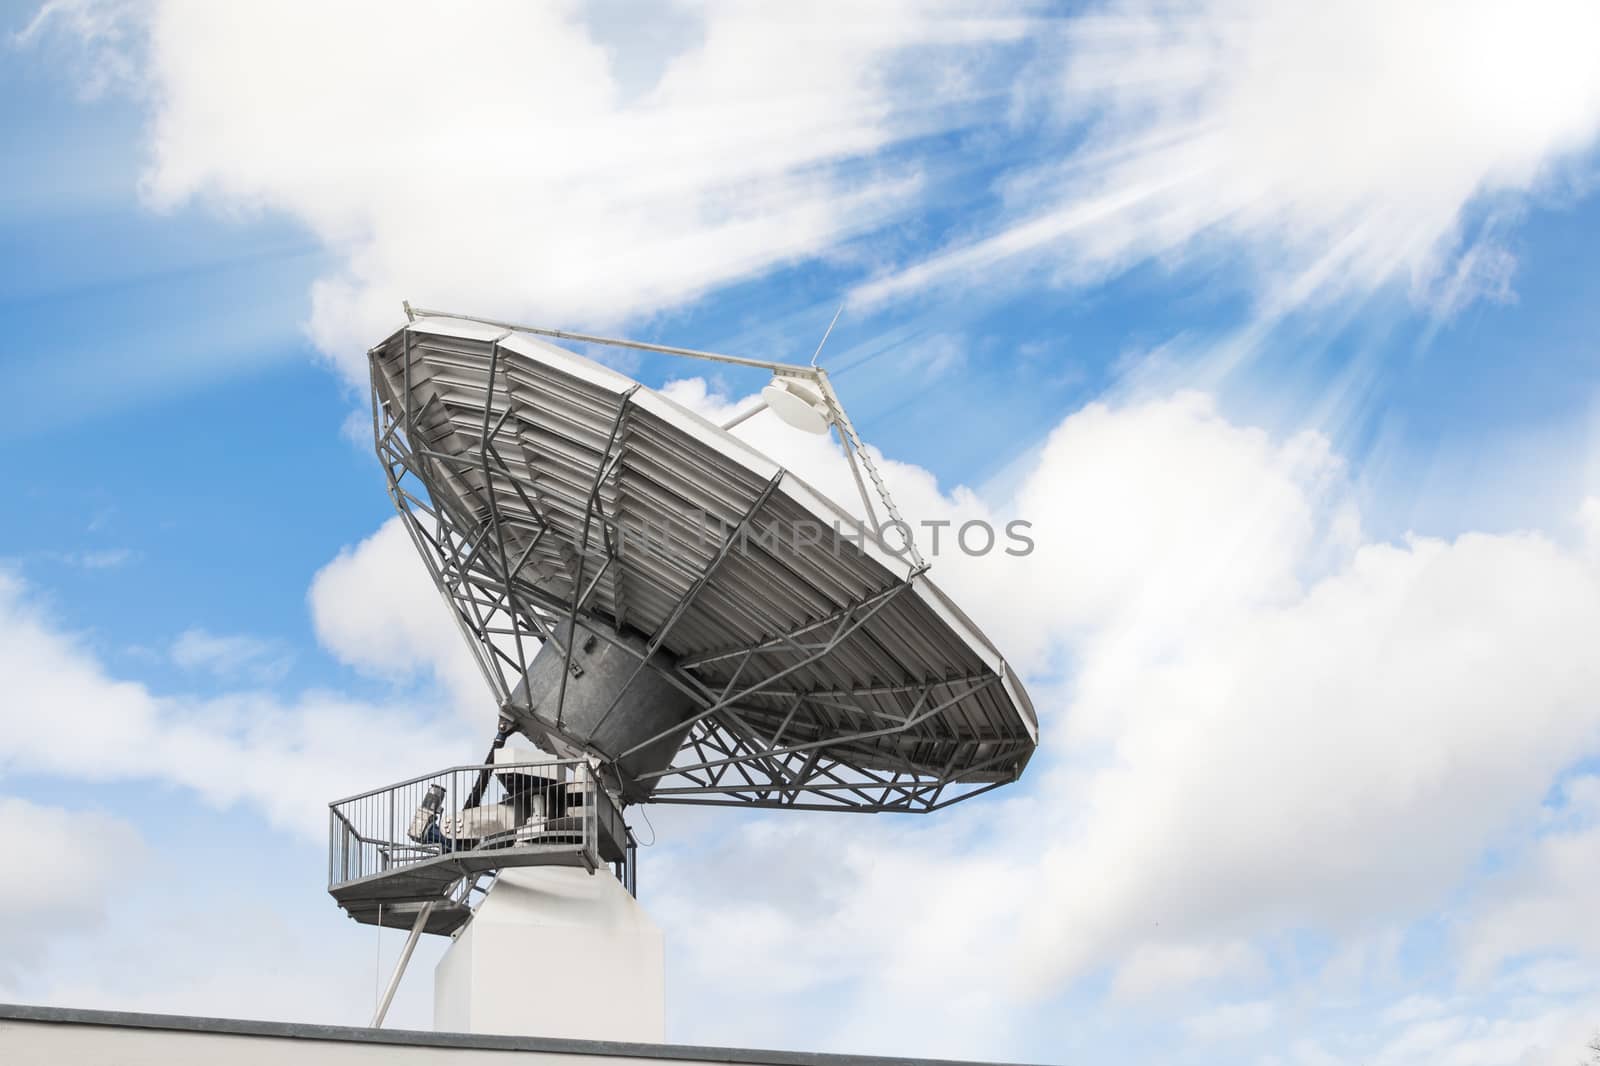 Telecommunications radar parabolic radio antenna as part of global communication technology stations system against sunny sky with sun rays sunbeams. Toned and filtered stock photo.